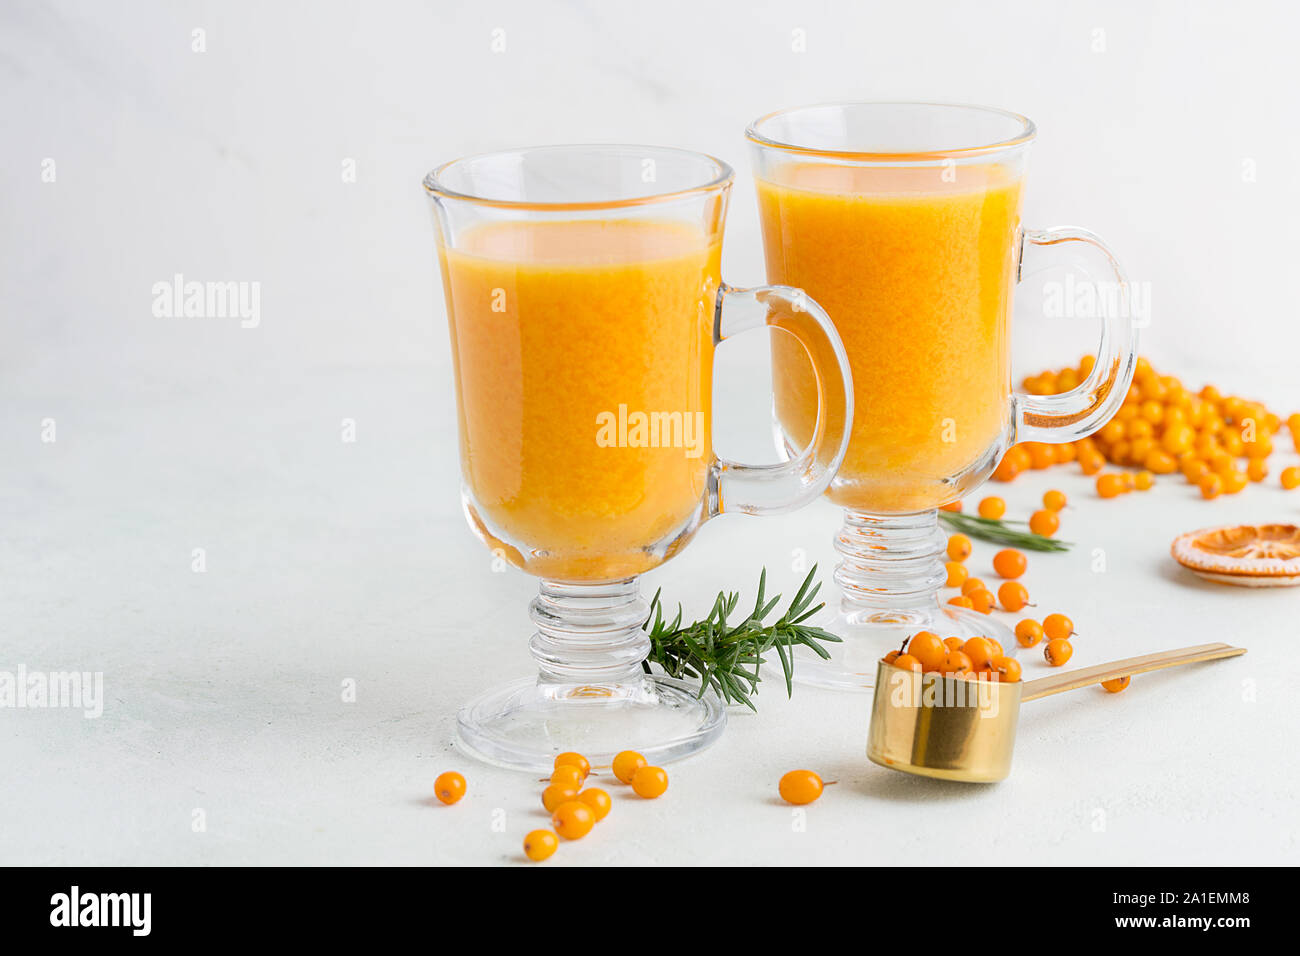 Bright hot tasty sea buckthorn drinks in glasses on white background with ingredients. Concept of autumn and winter warm drinks Stock Photo